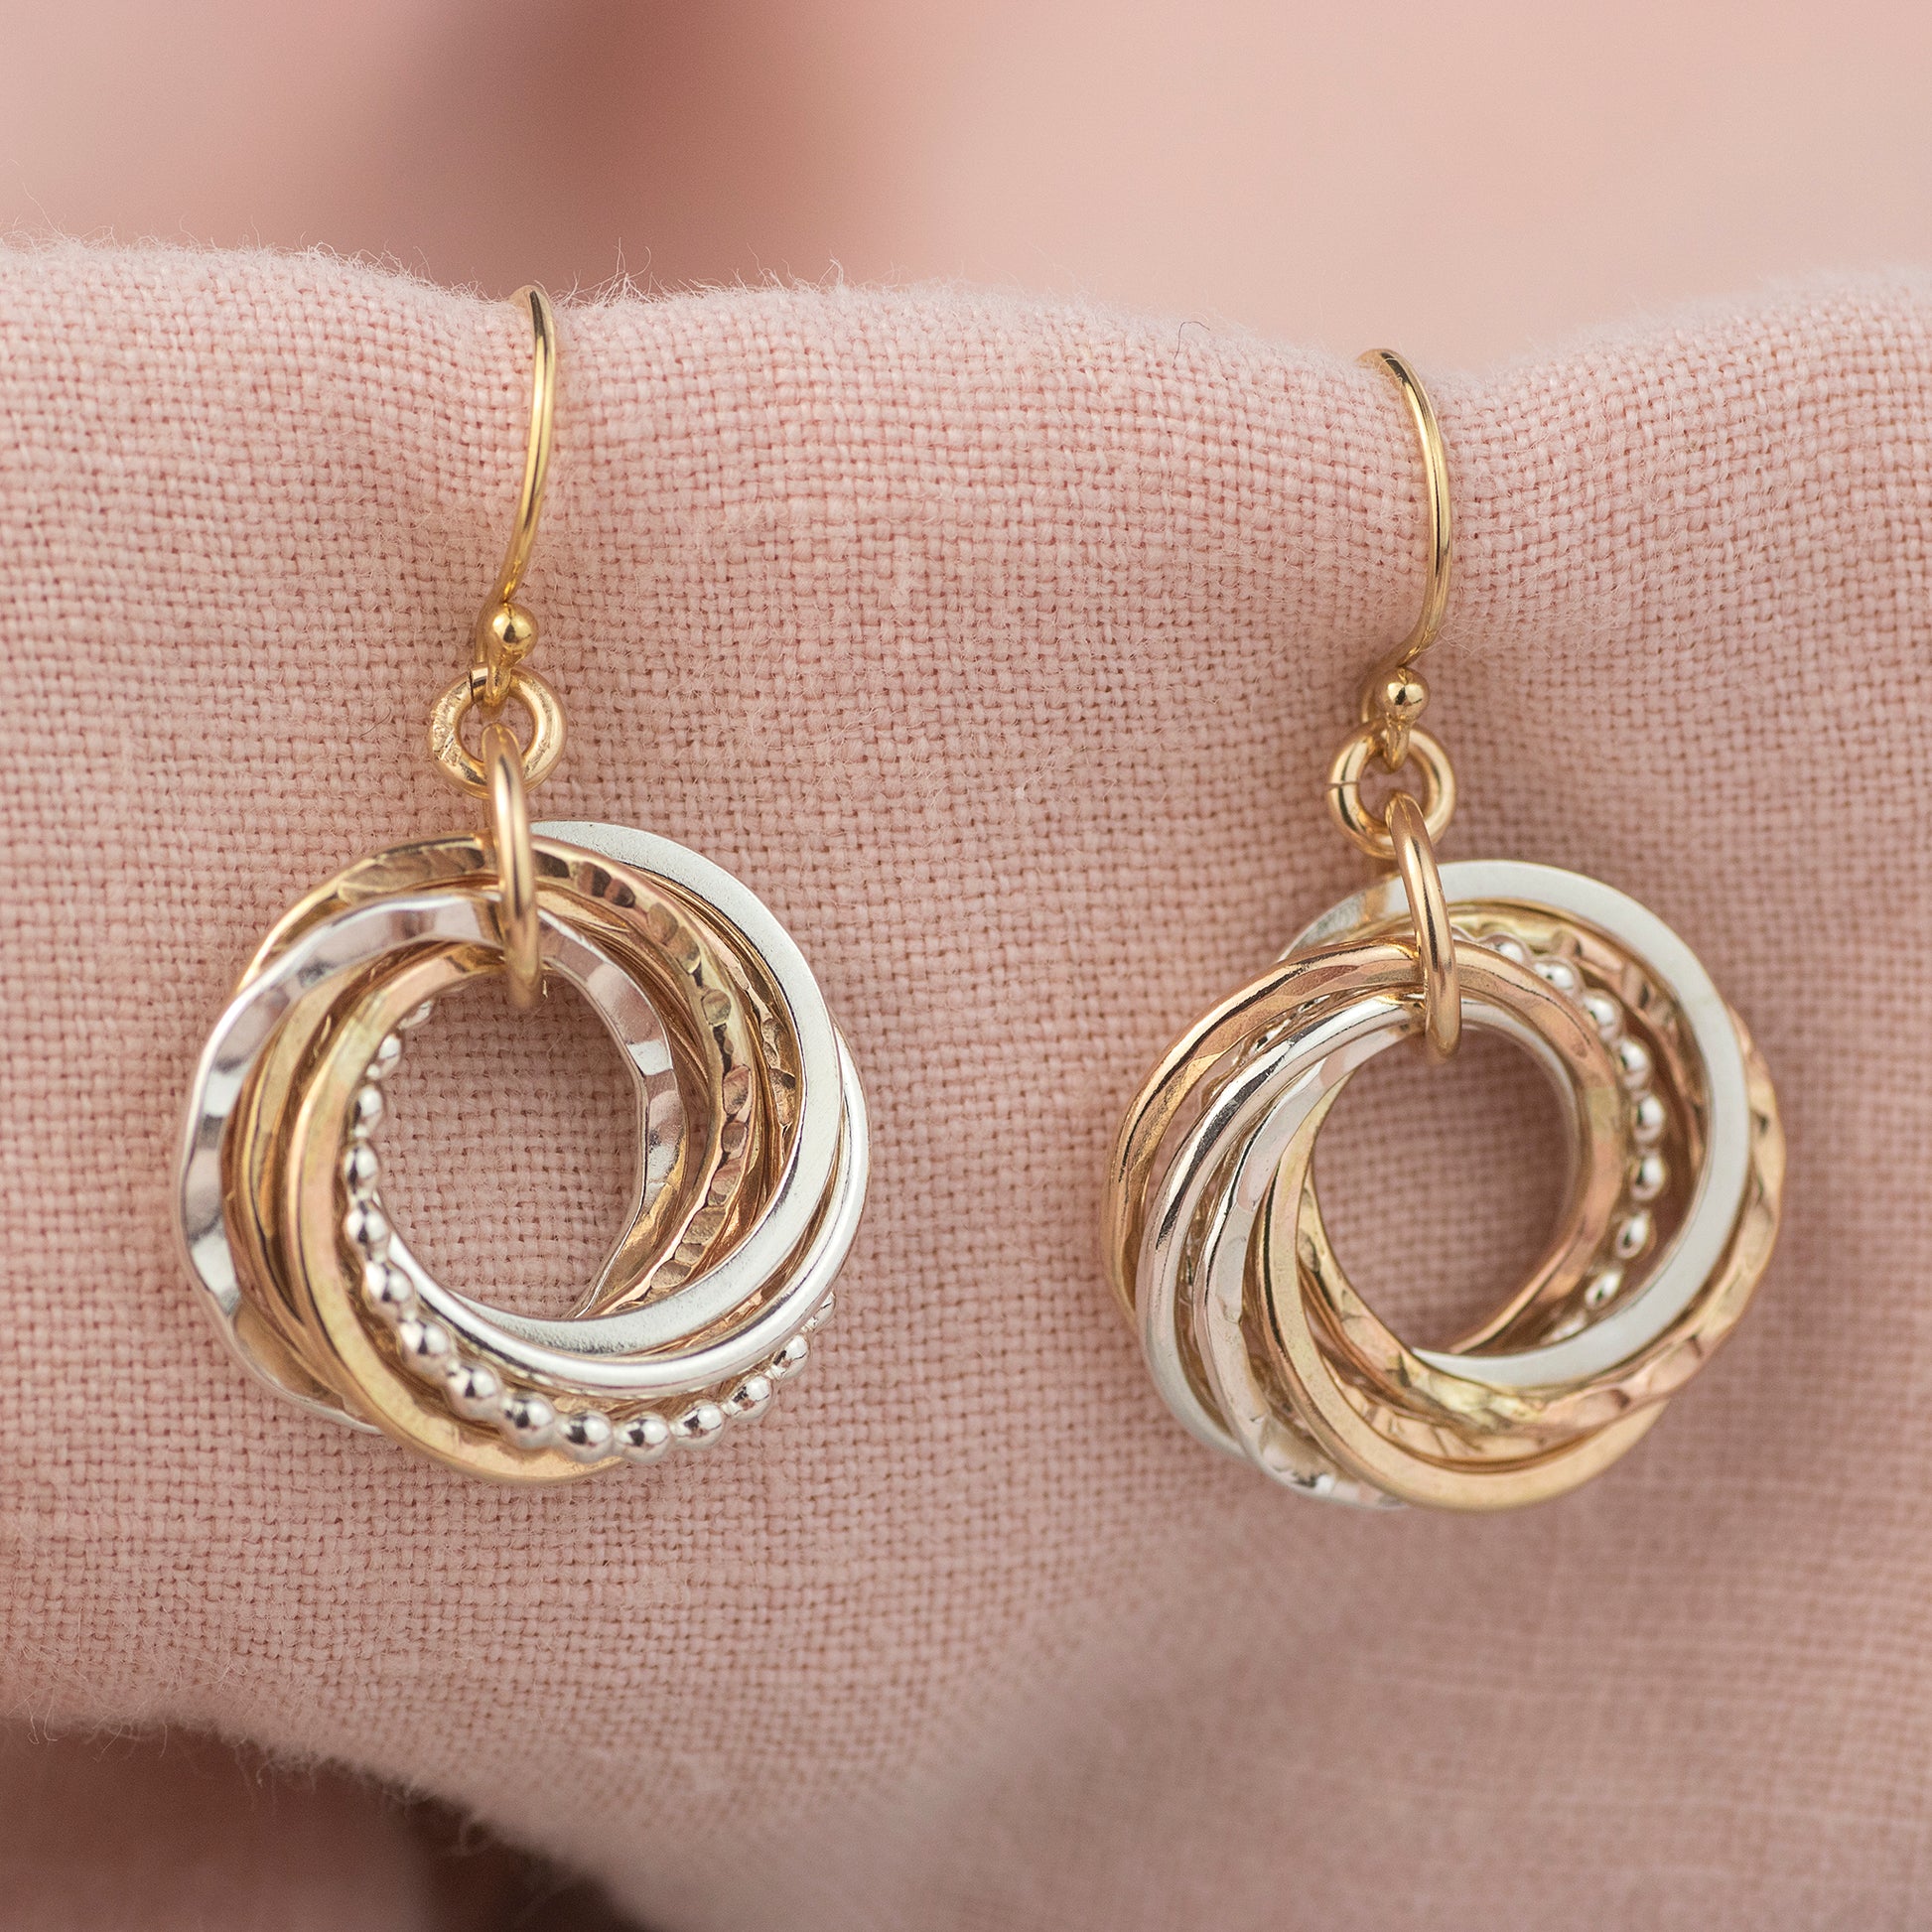 80th Birthday Earrings - The Original 8 Links for 8 Decades Earrings - Petite Silver & Gold